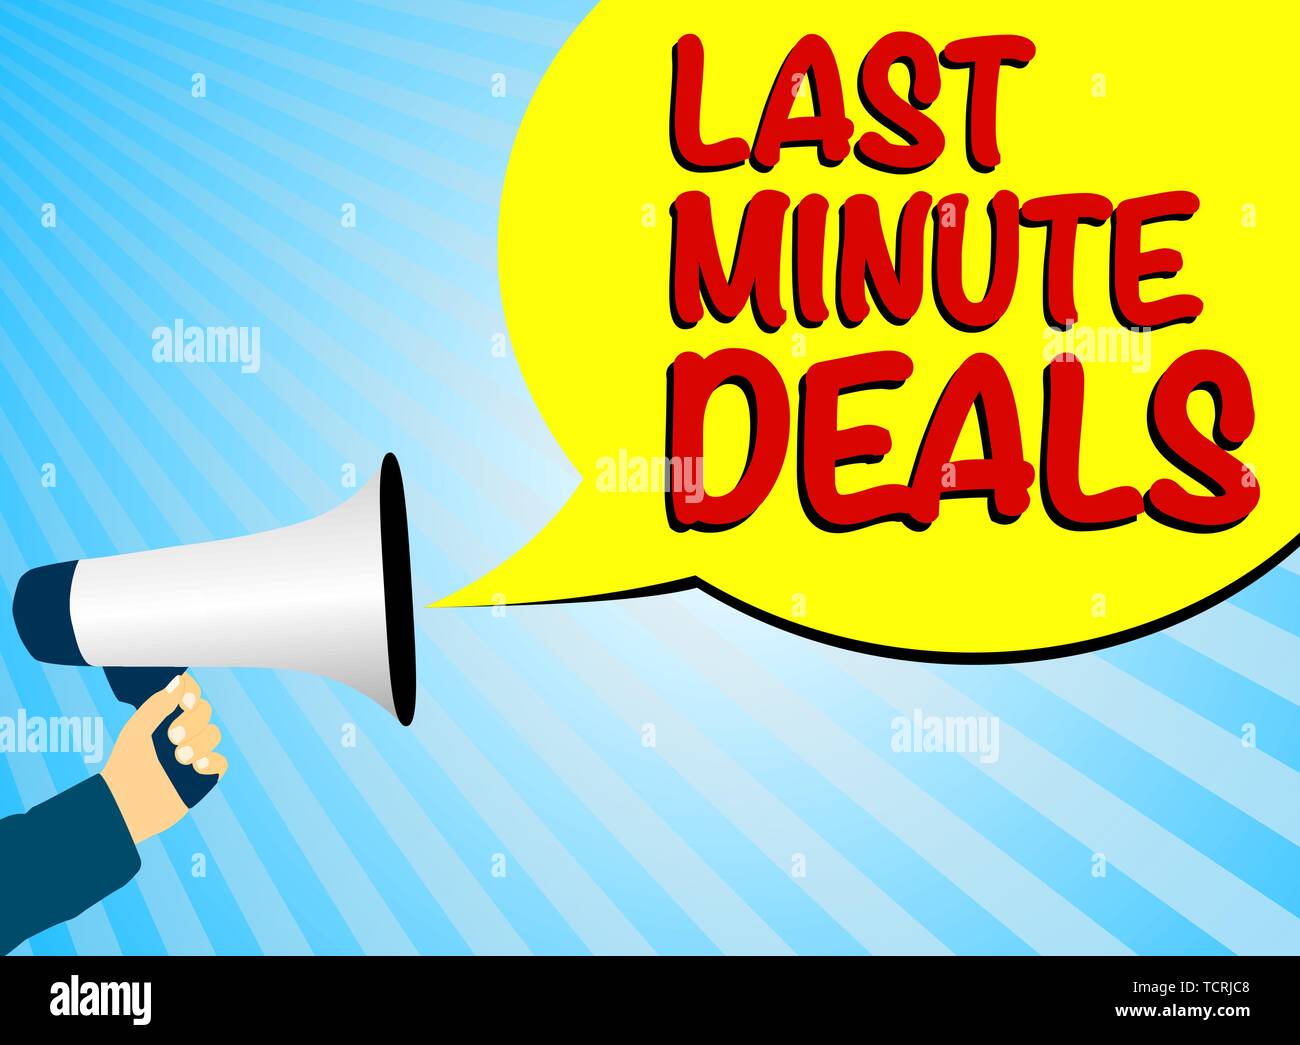 https://c8.alamy.com/comp/TCRJC8/hand-holding-megaphone-or-bullhorn-against-blue-background-with-speech-bubble-and-text-last-minute-deals-vector-illustration-TCRJC8.jpg